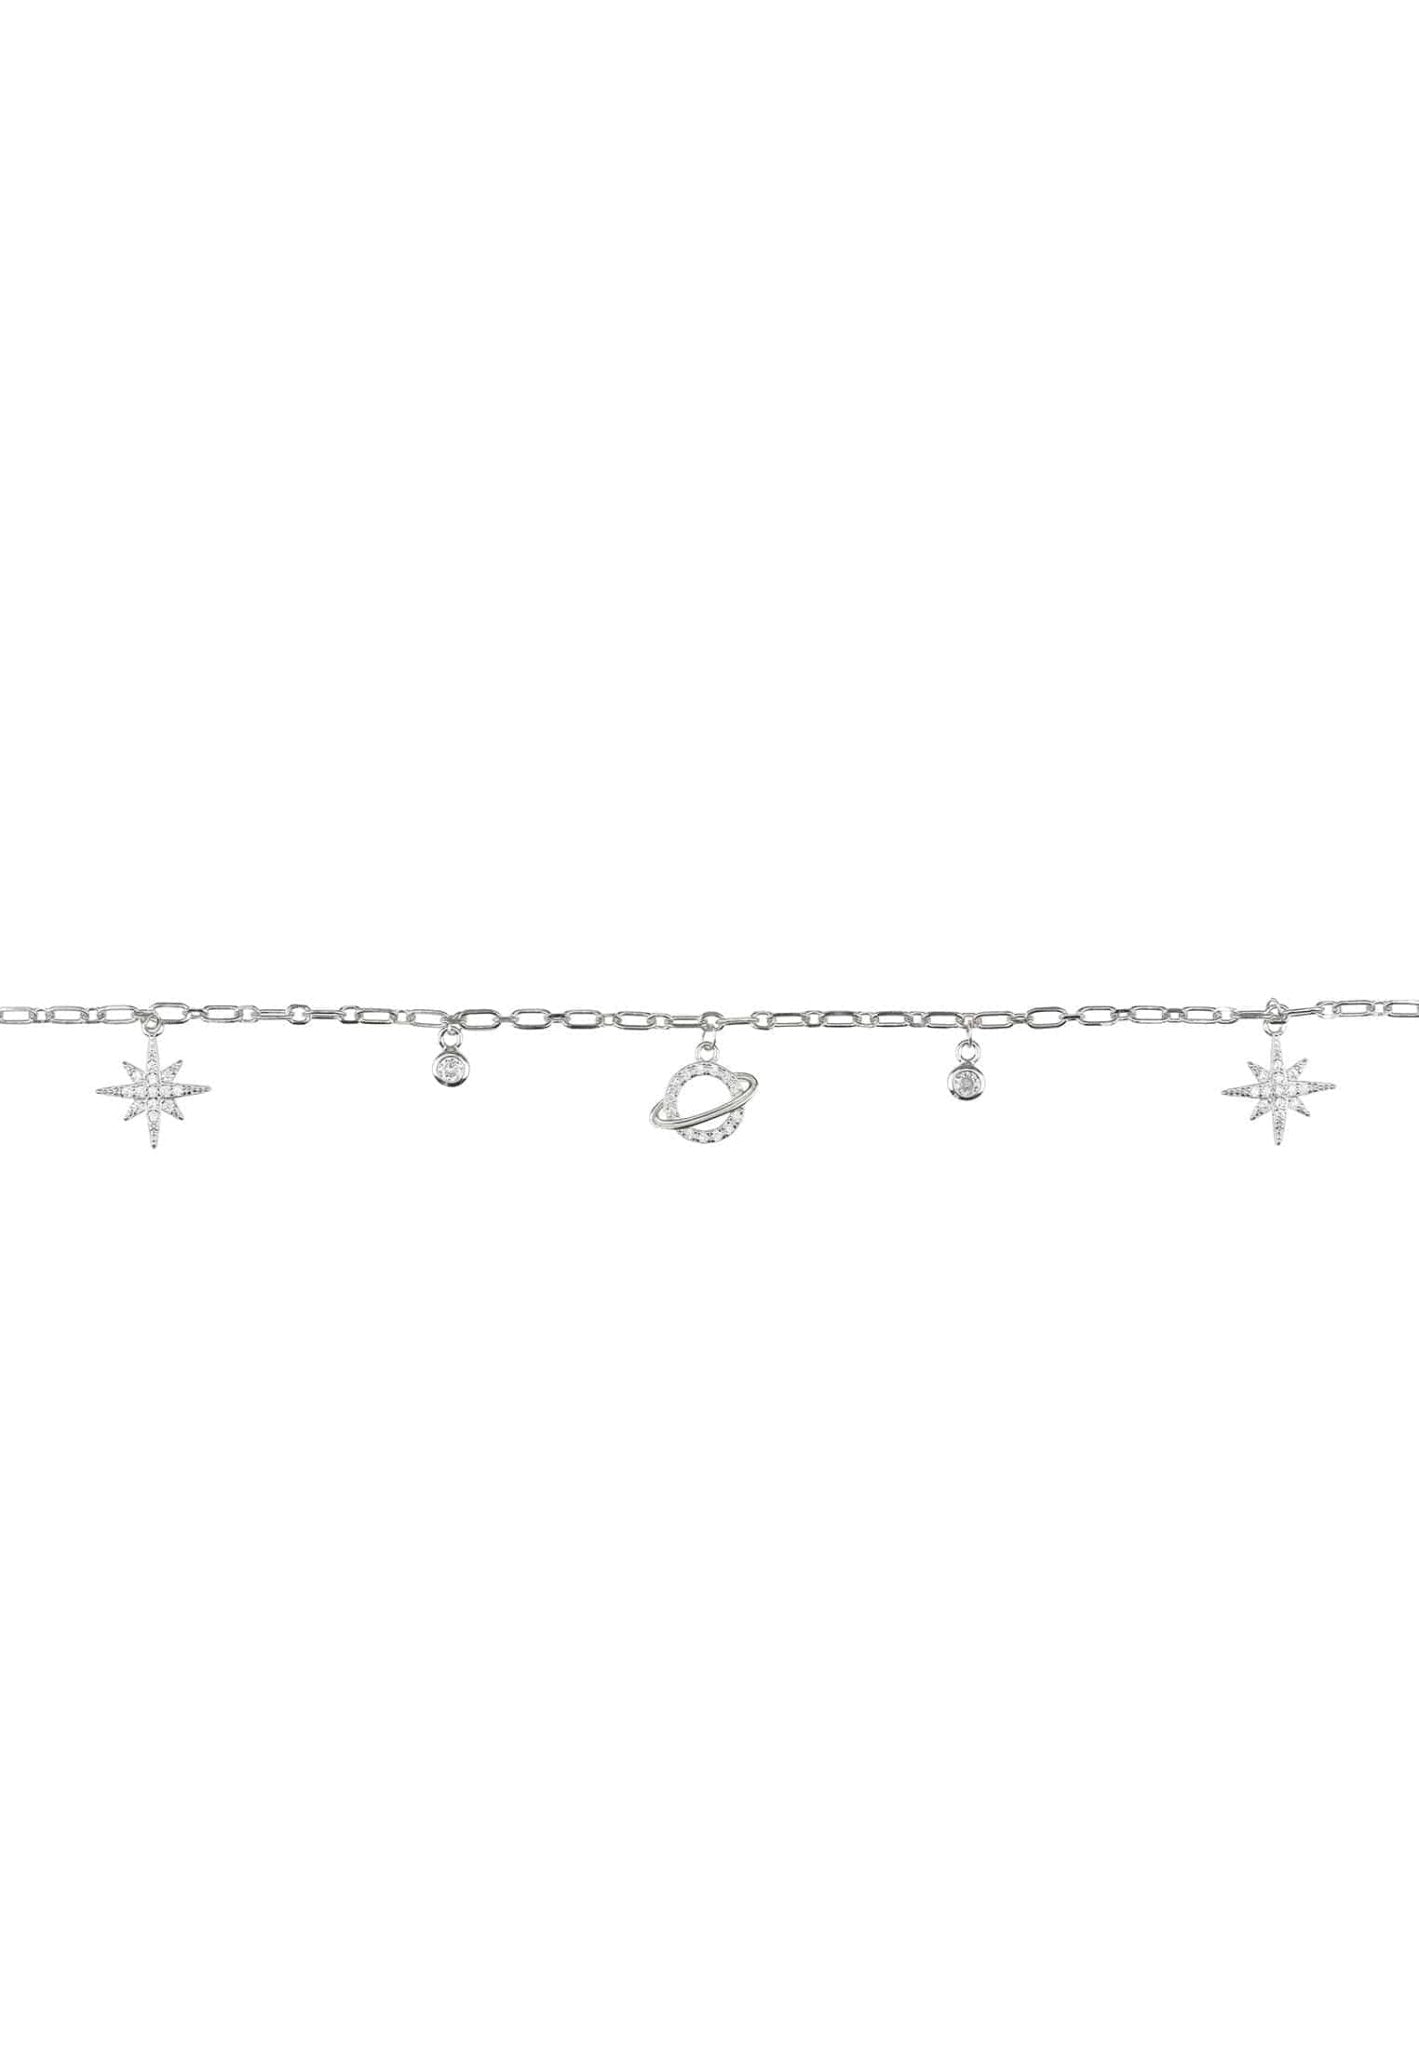 Galactic Anklet Silver - LATELITA Anklet